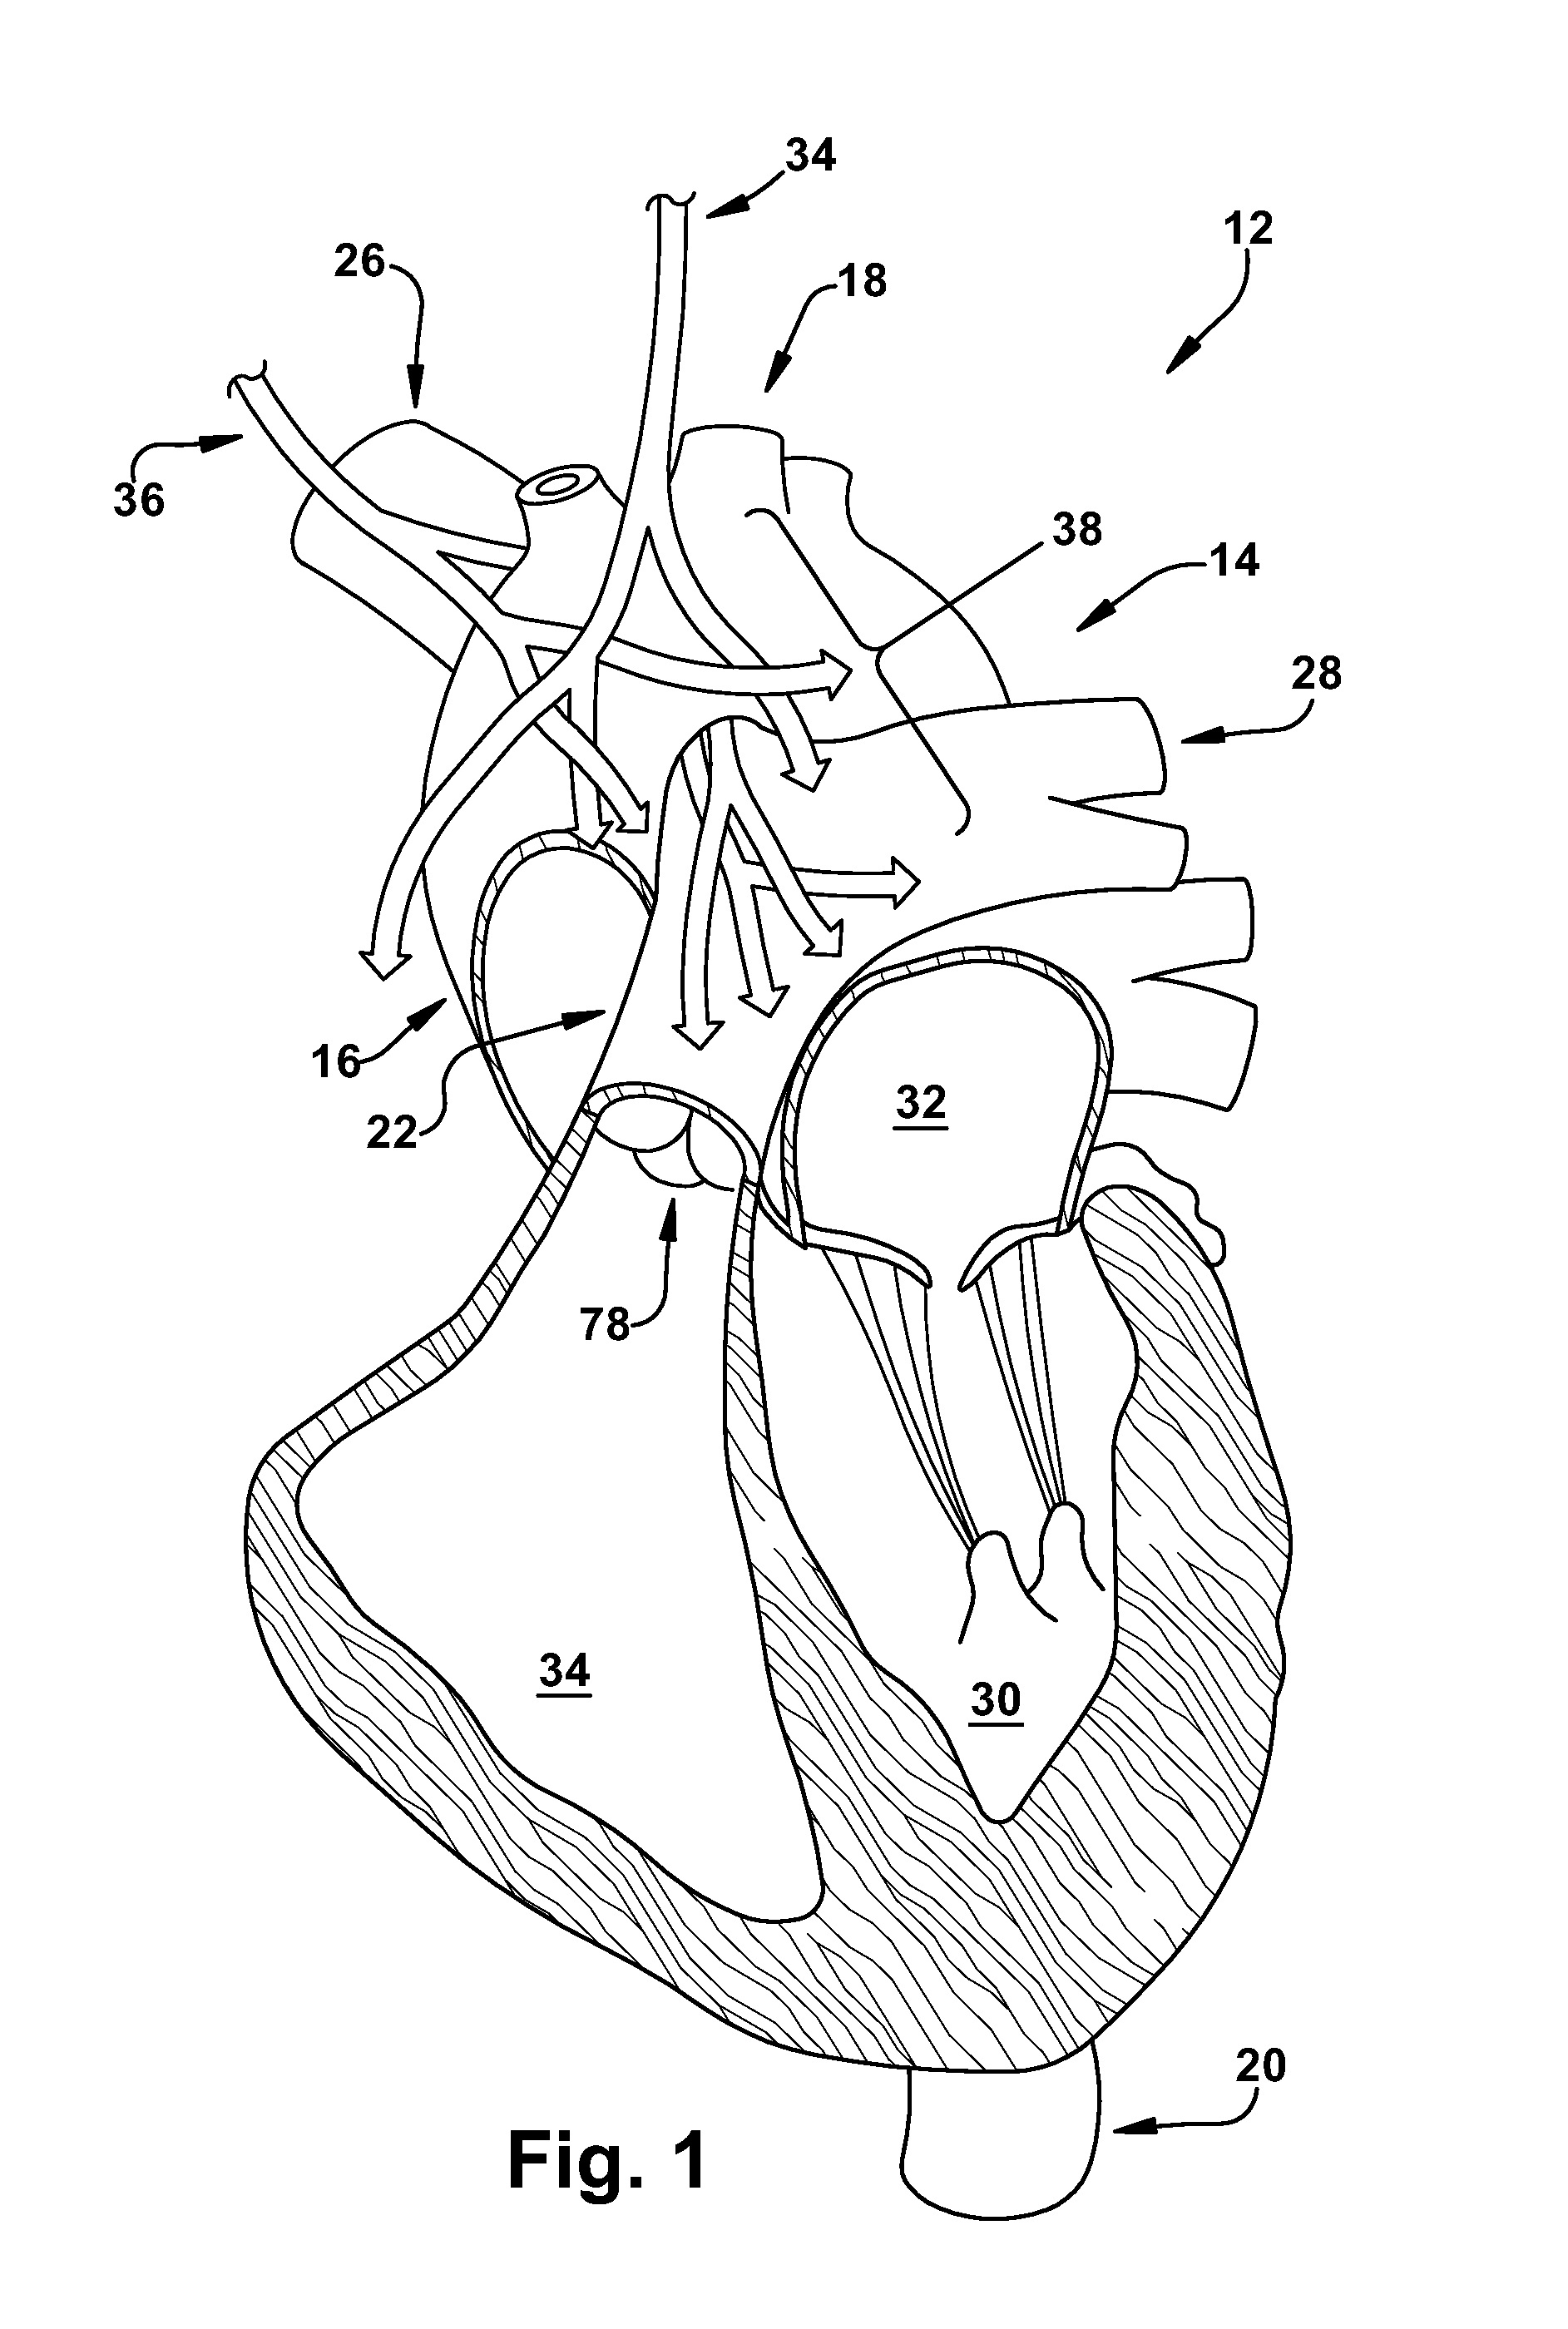 Device, system, and method for modulating cardiac function